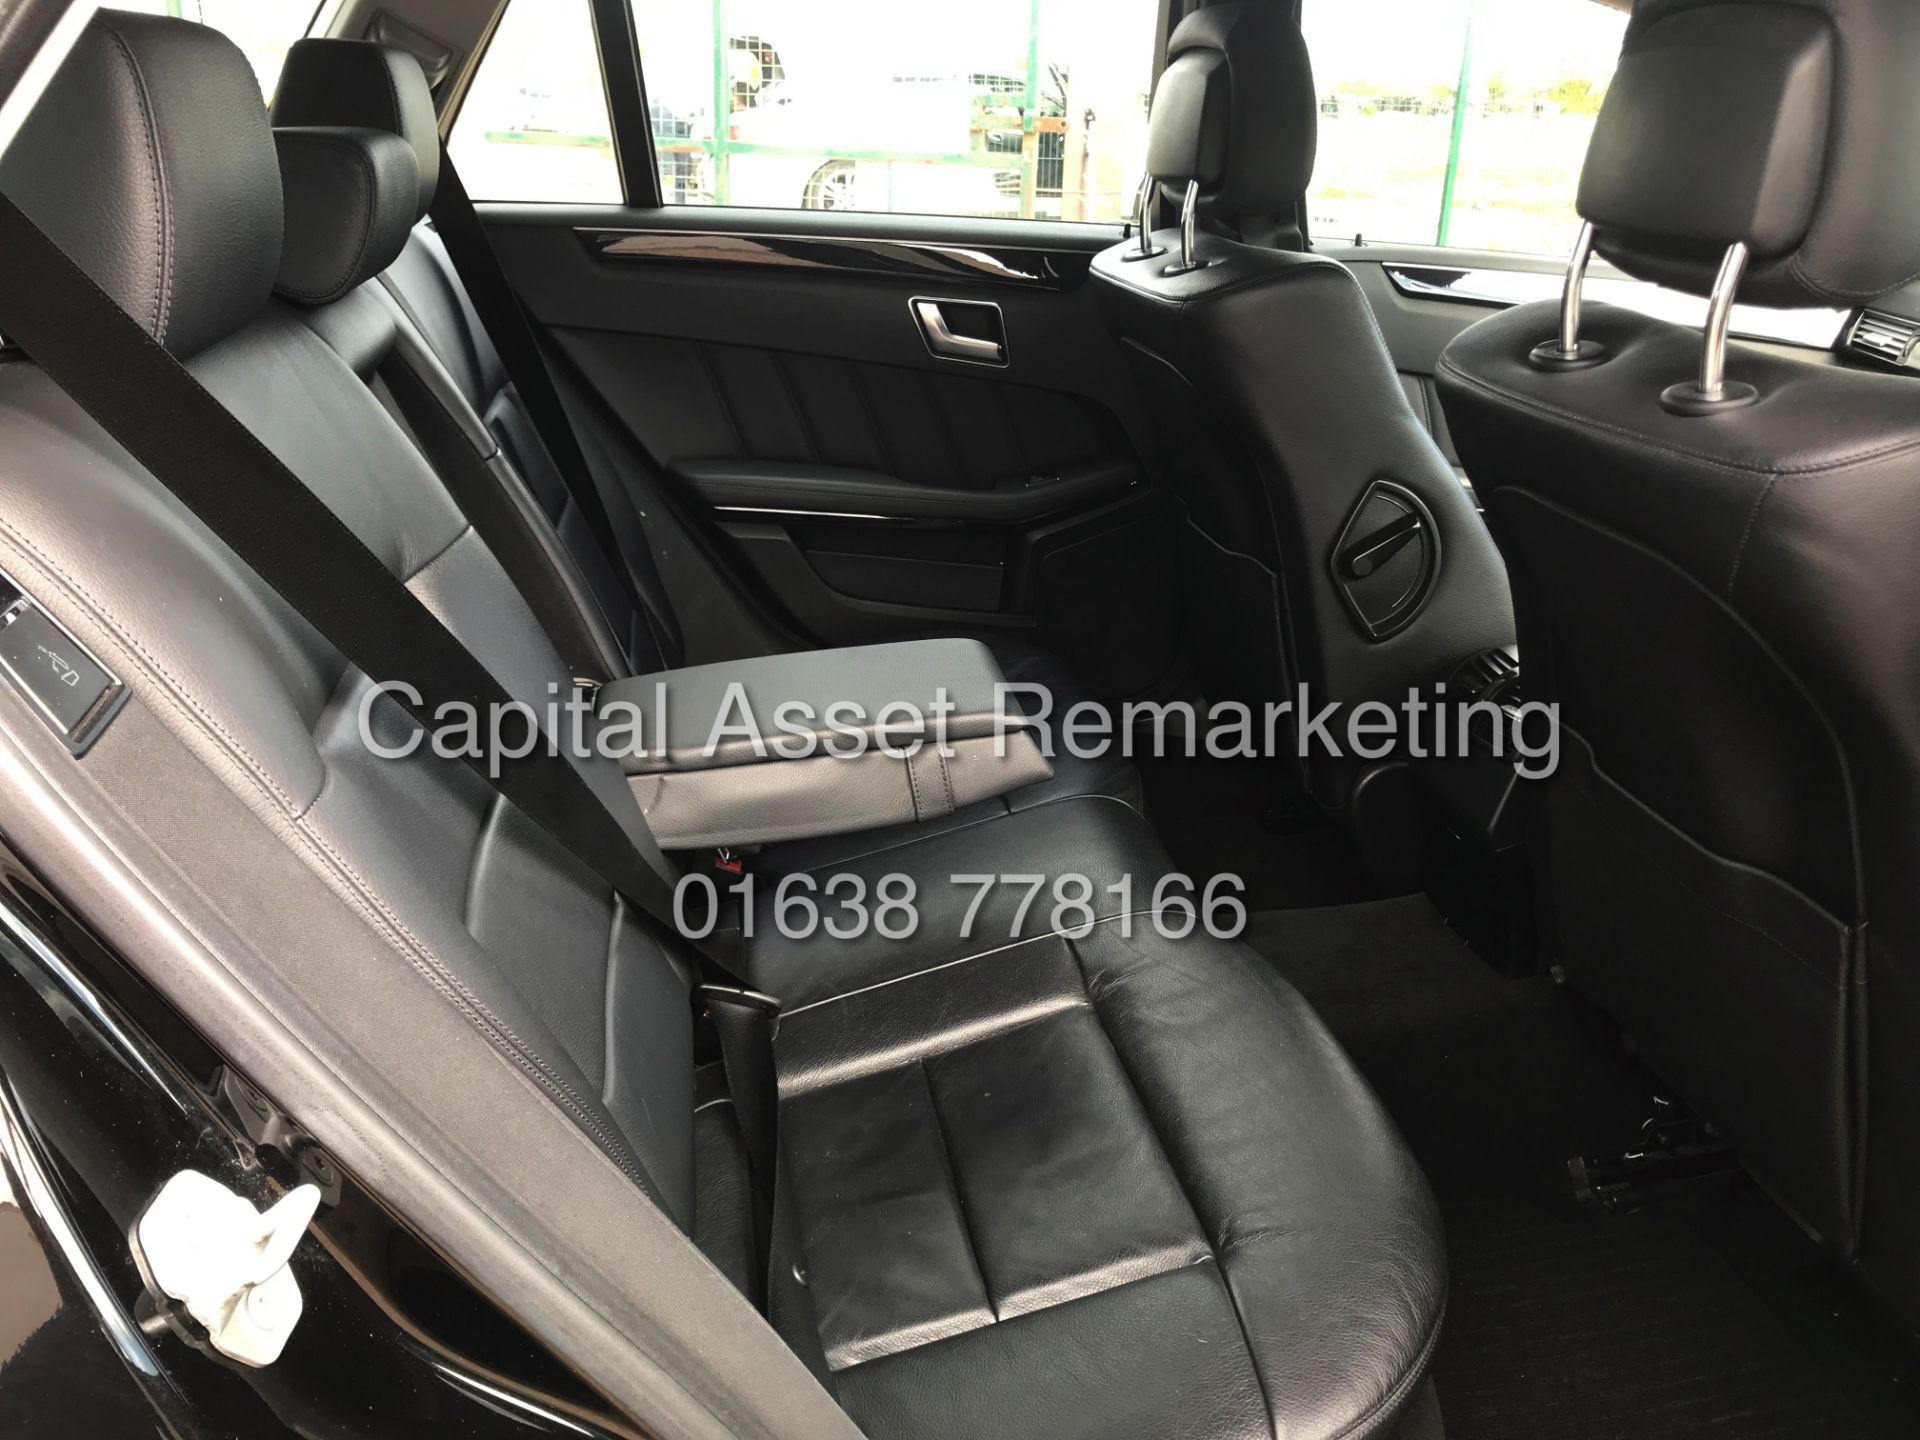 MERCEDES E220d 7G AUTO "EXECUTIVE - SPECIAL EQUIPMENT" SAT NAV - LEATHER - CLIMATE - CRUISE - Image 18 of 20